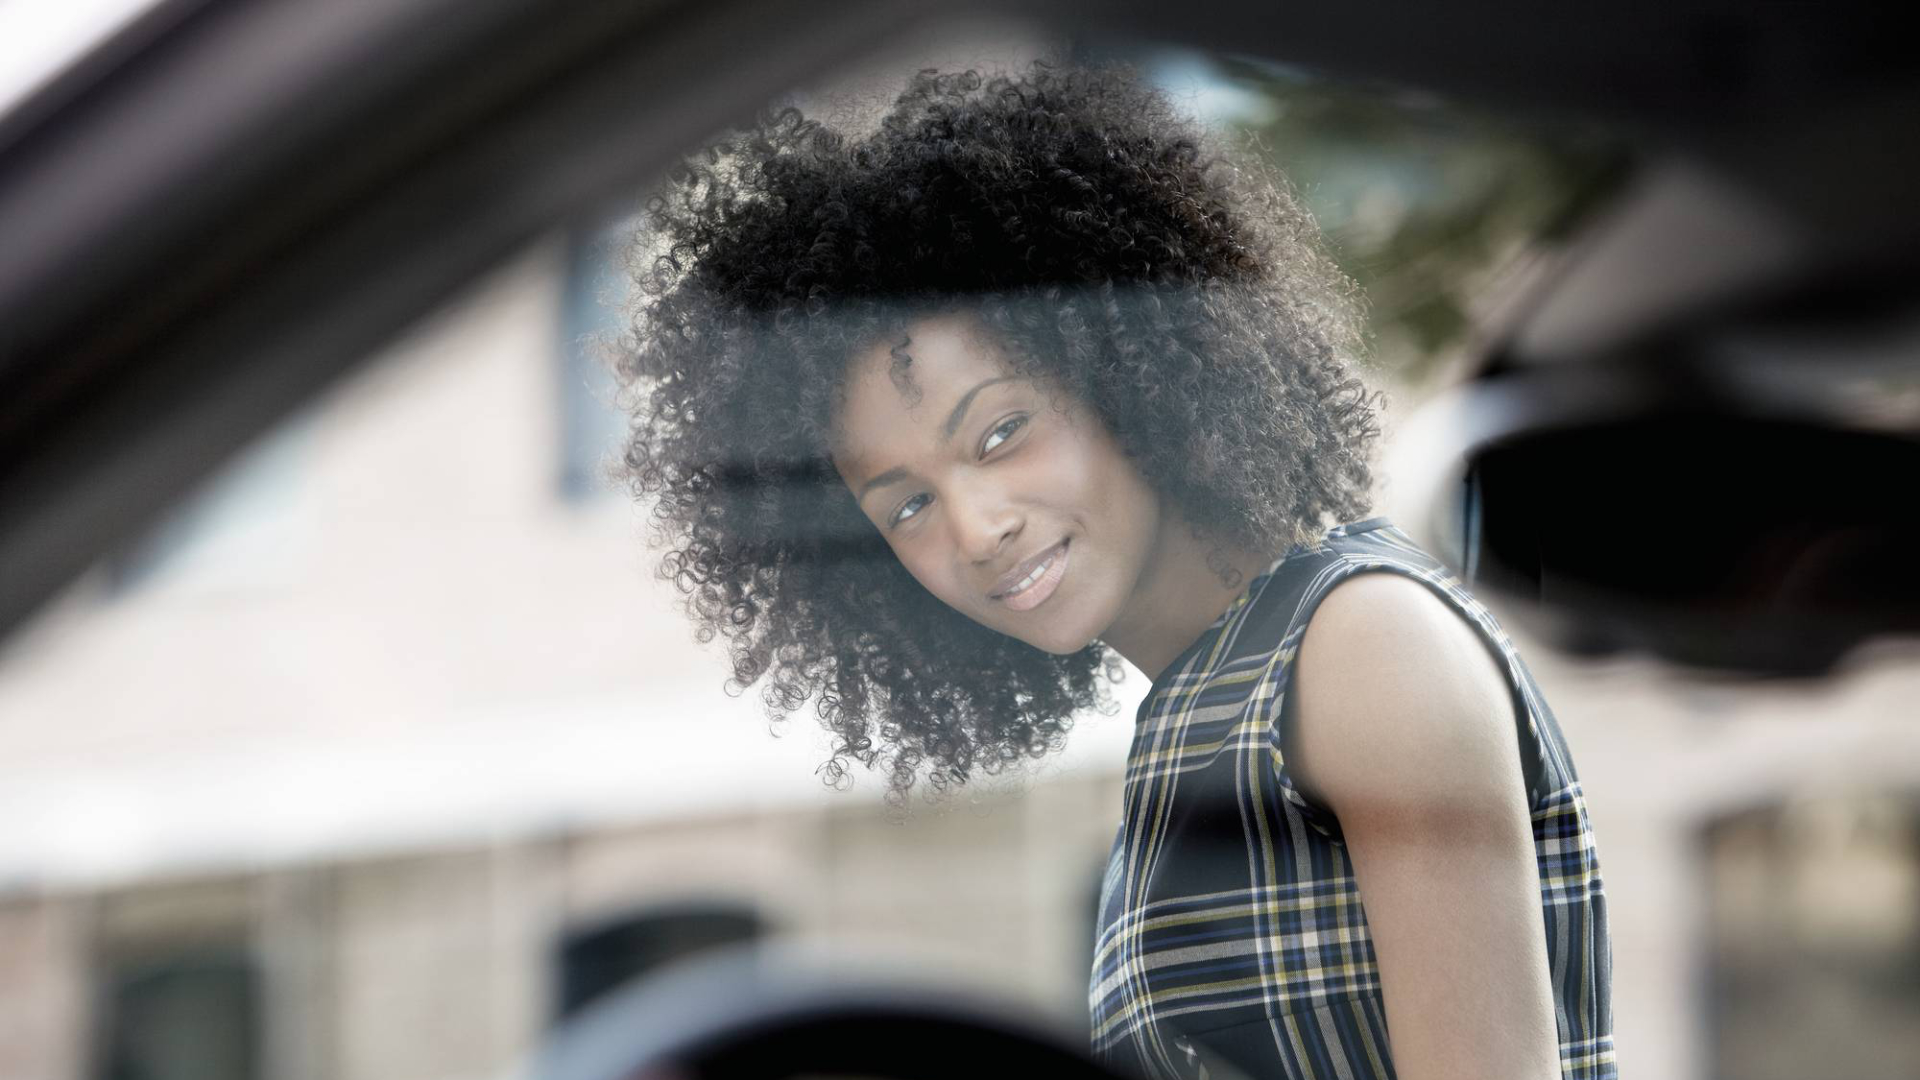 A woman stands next to an Audi and looks into the car with a curious but friendly expression.